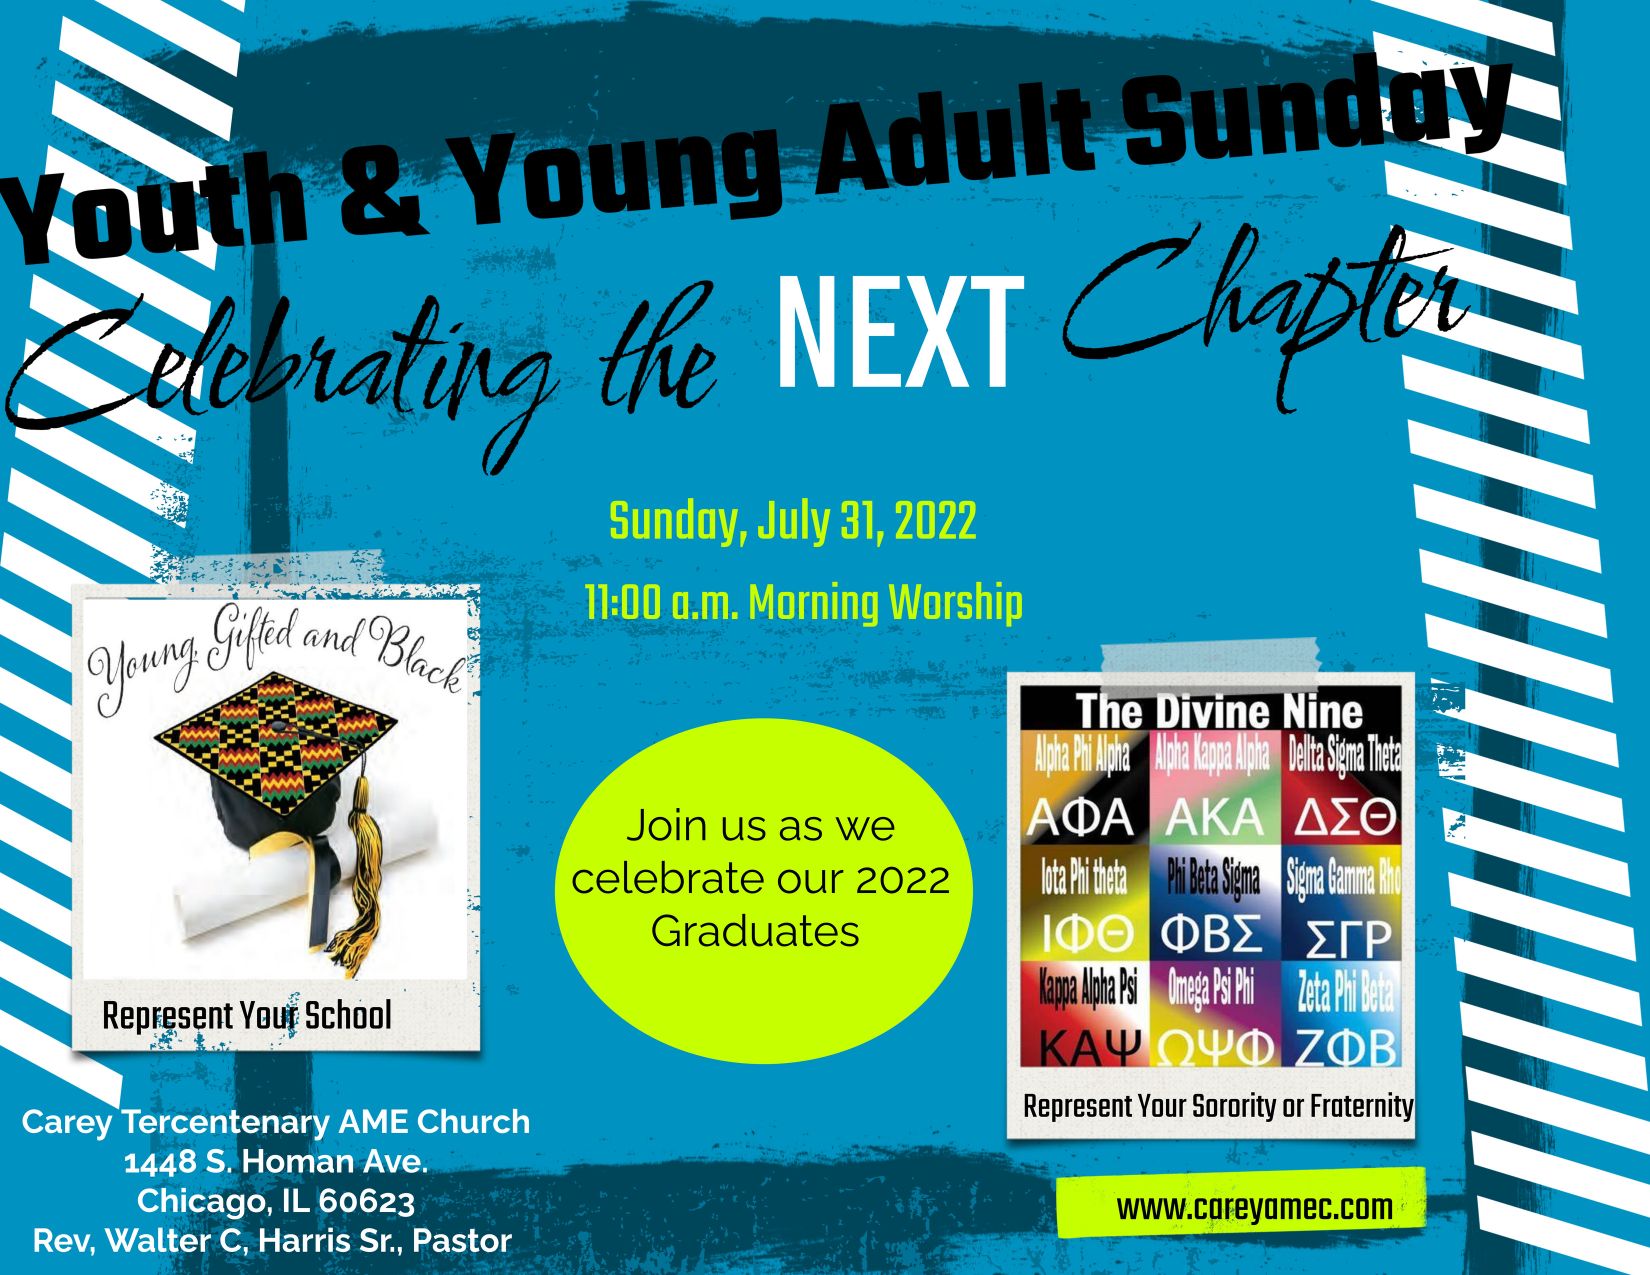 Youth Young Adult Sunday